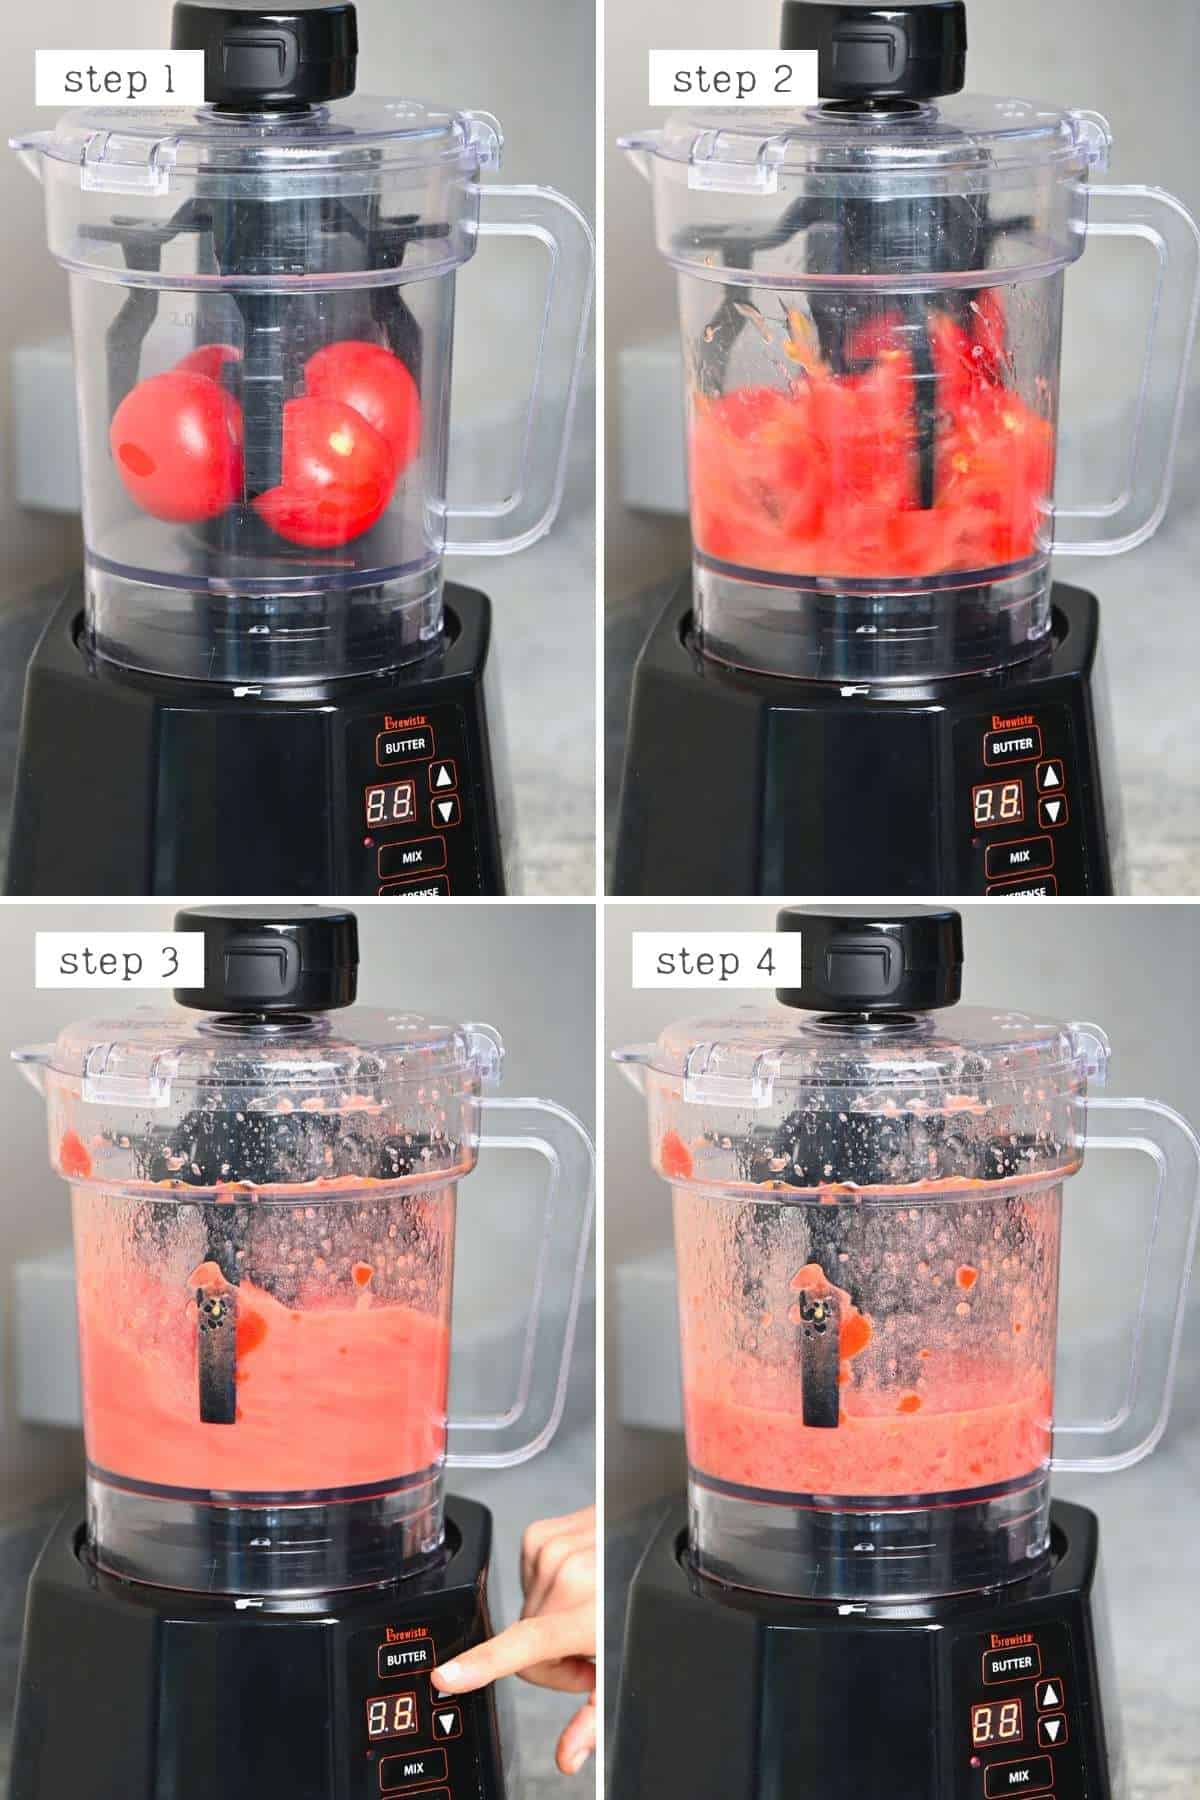 Making Tomato Juice With Your Juicer
